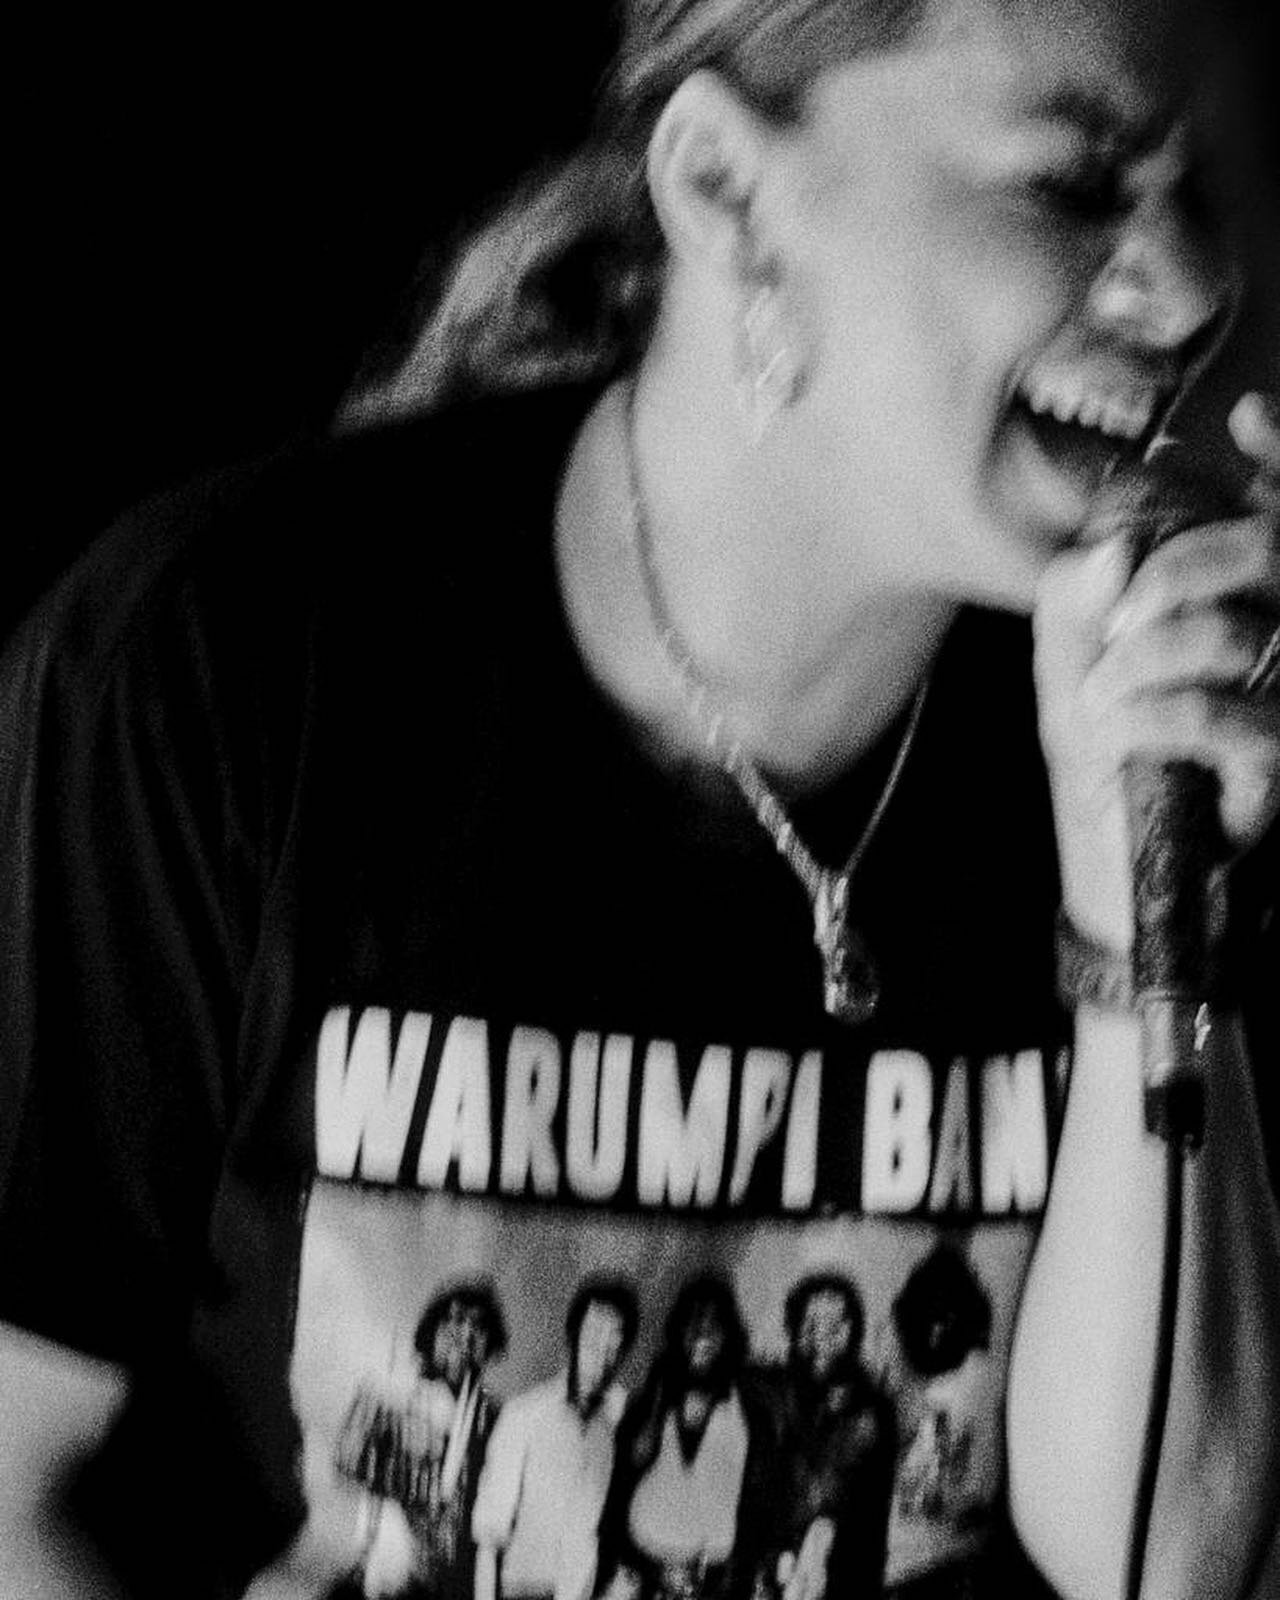 Following a successful launch of the Tawny Grogmouth 3.0 at Buckettys late last year the magnificent Prinnie Stevens and her band graced the stage with a captivating performance

These images, taken by BAD photographer Renate Rienmuller, just landed 